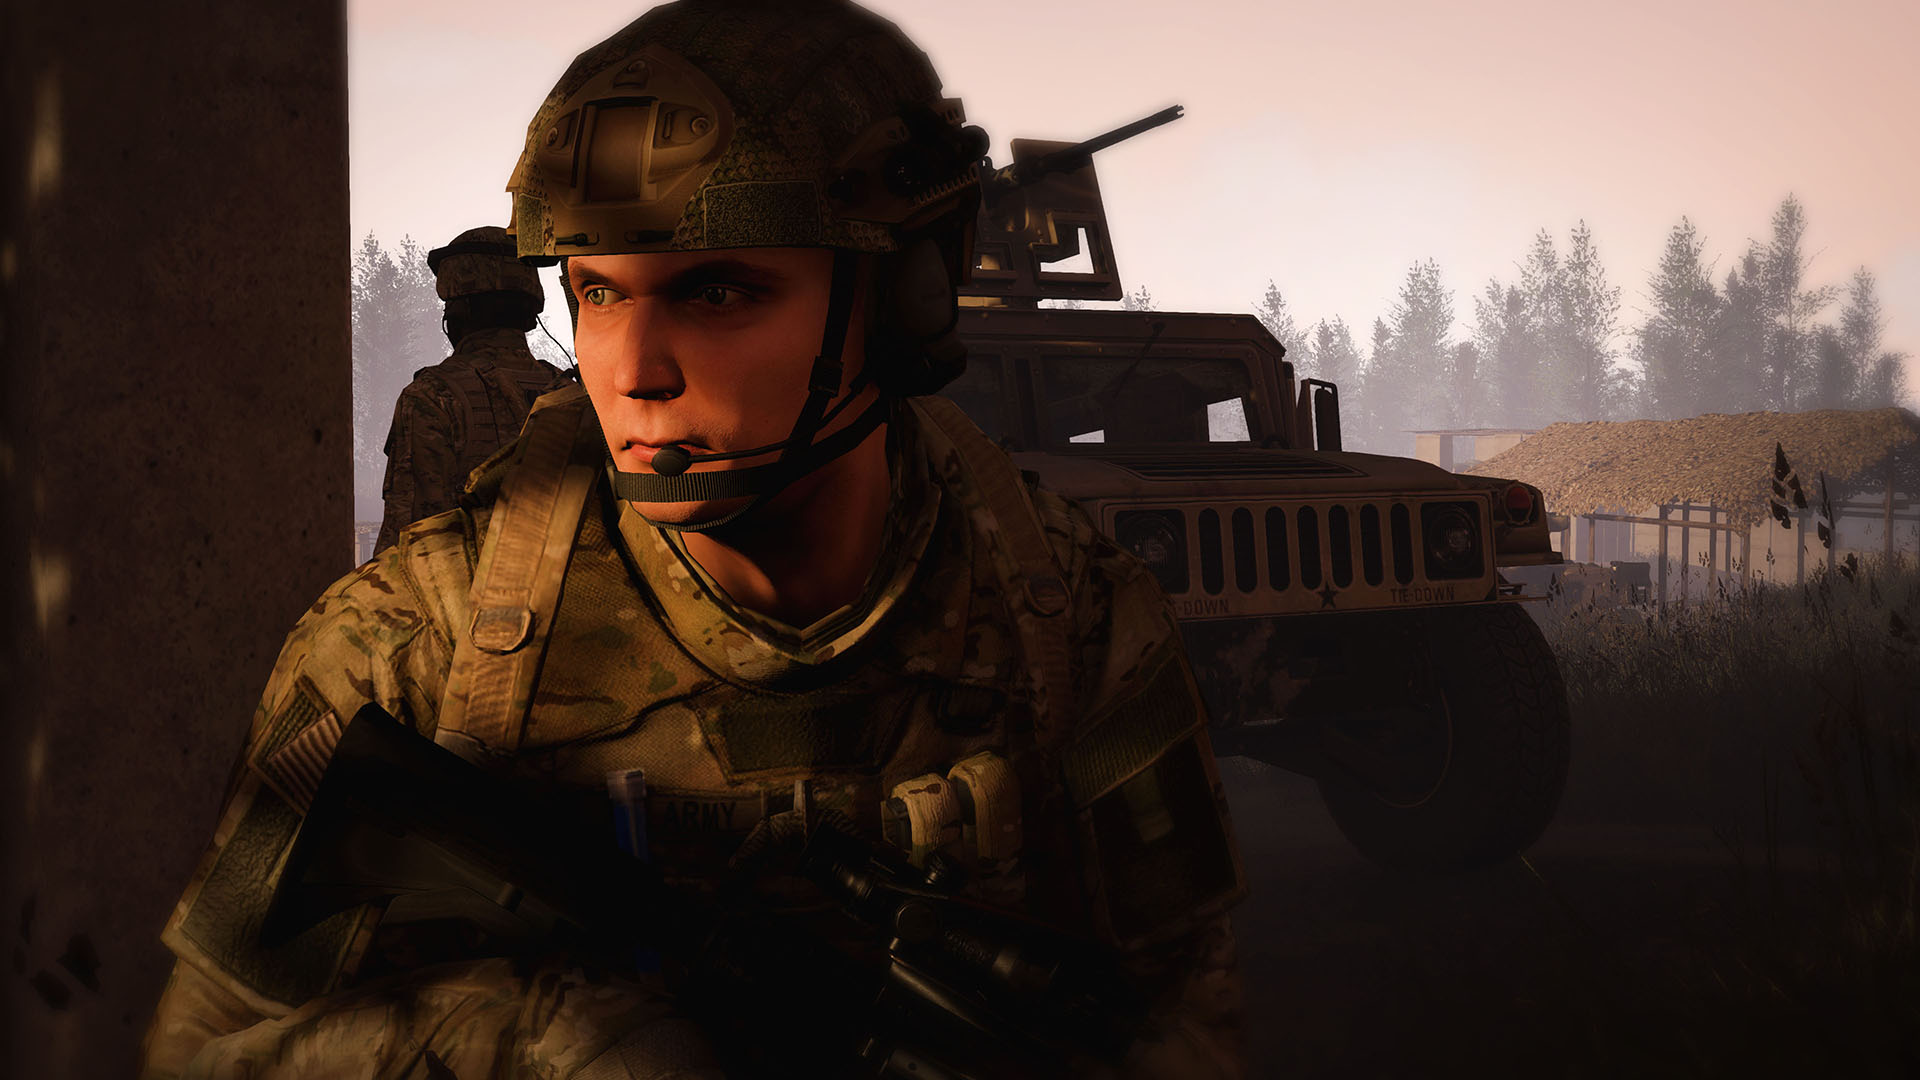 Squad is an exceptional military shooter so far